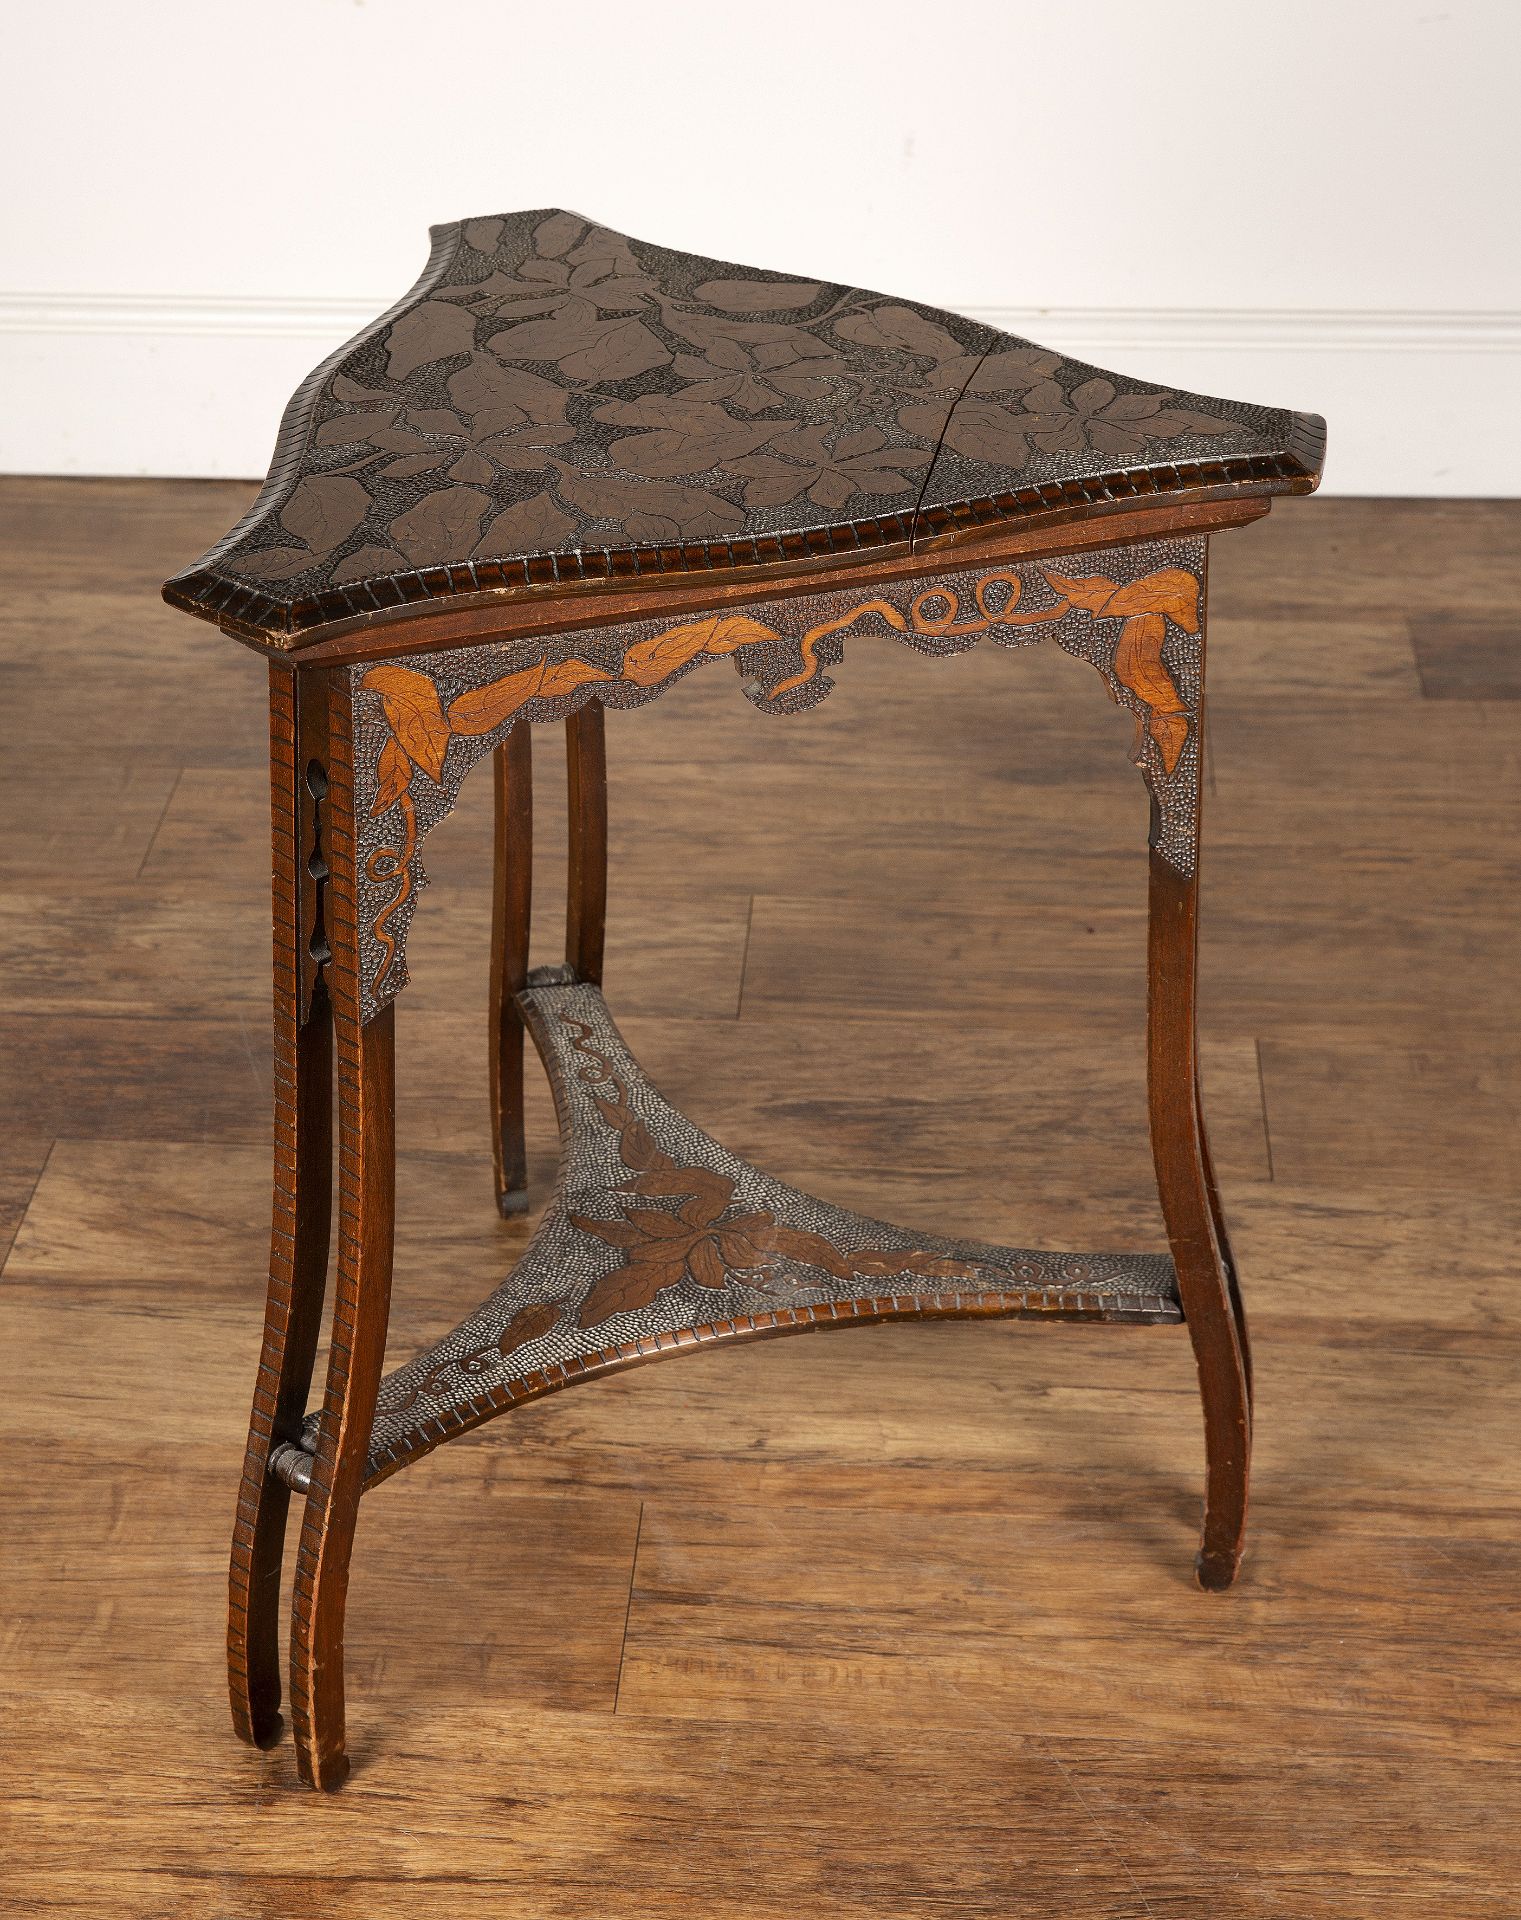 Art Nouveau pokerwork side table, with triangular top, decorated with leaves above a decorated - Image 4 of 6